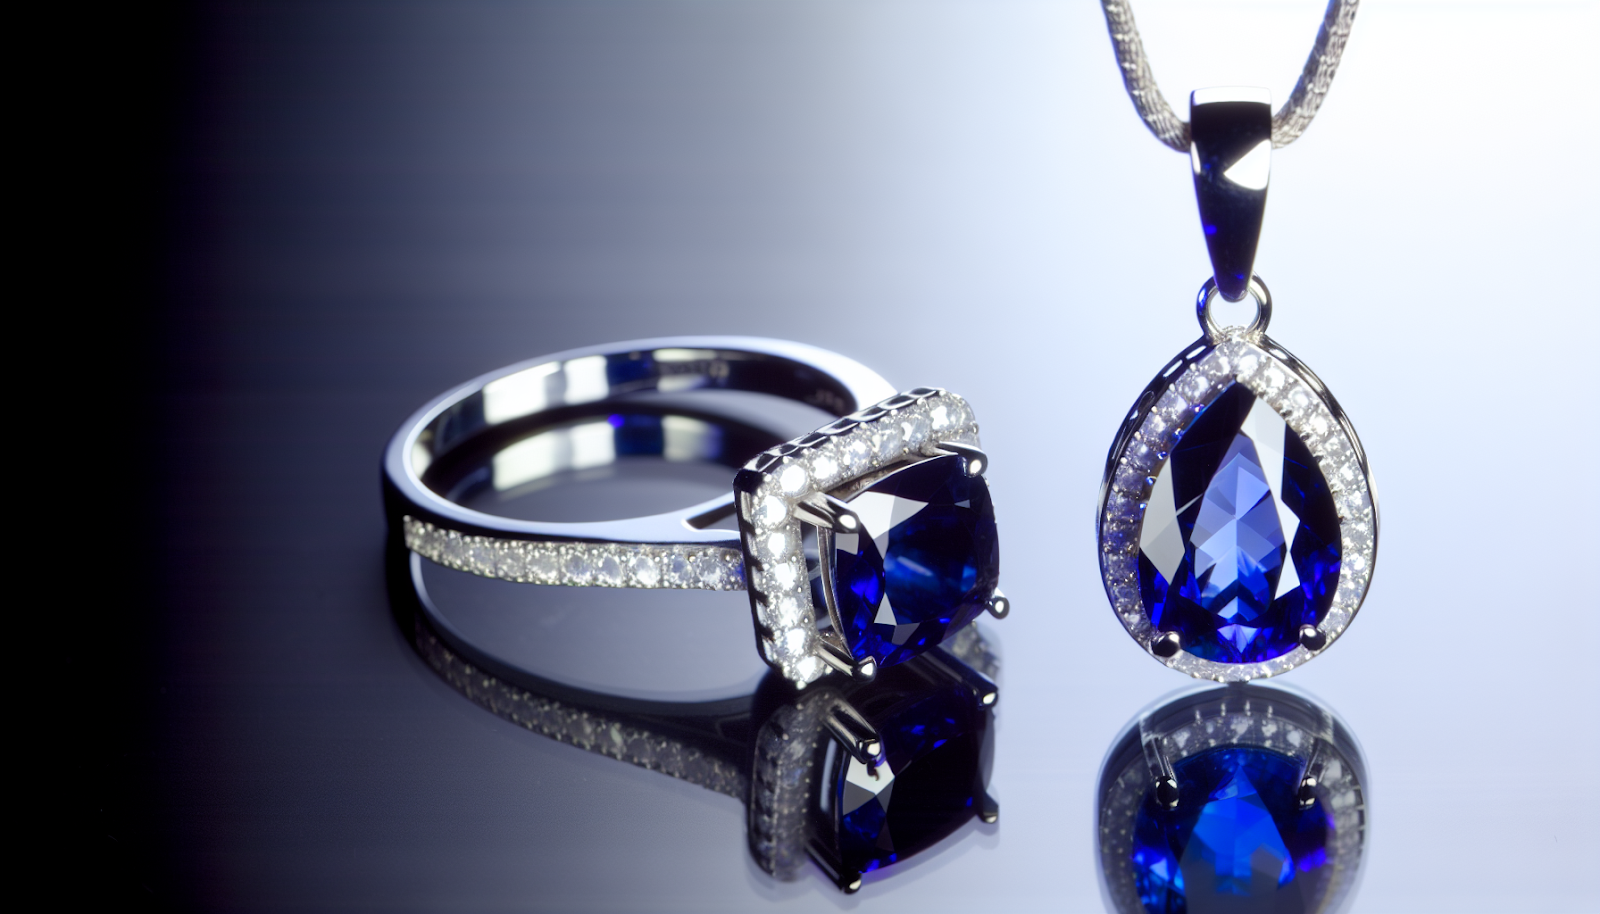 Exquisite sapphire ring and pendant